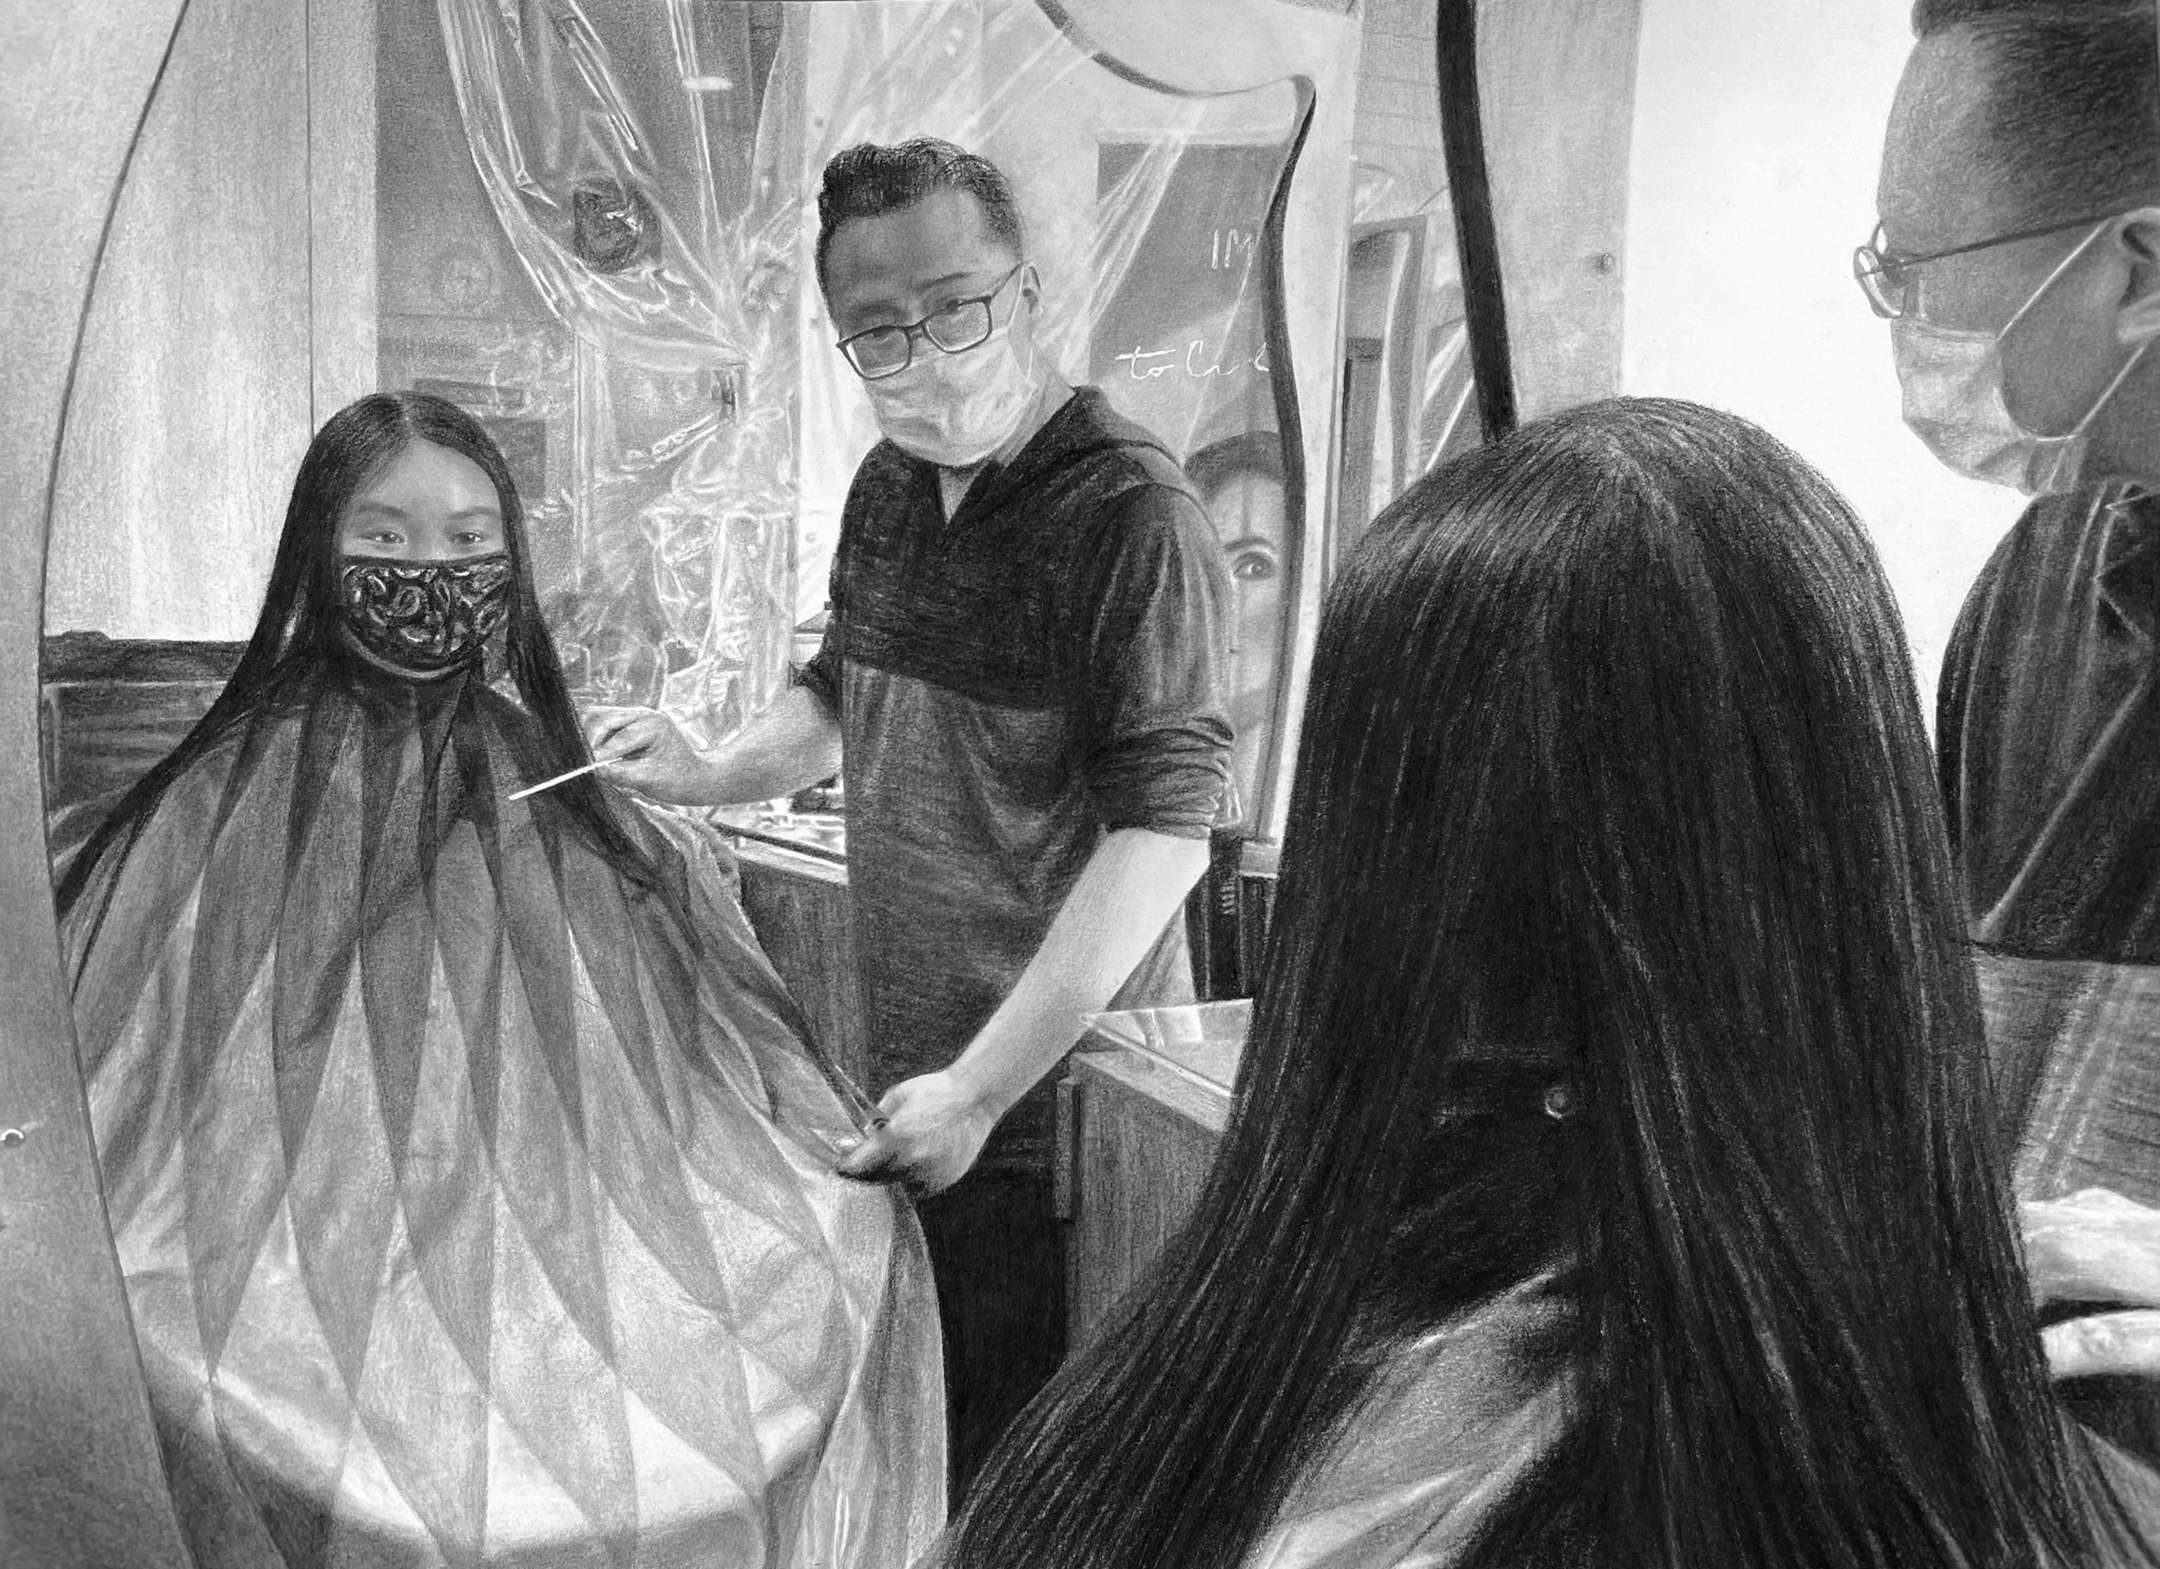 black and white illustration of a young woman sitting in a barber chair with the barber standing behind her, both wearing face masks and reflected in a mirror